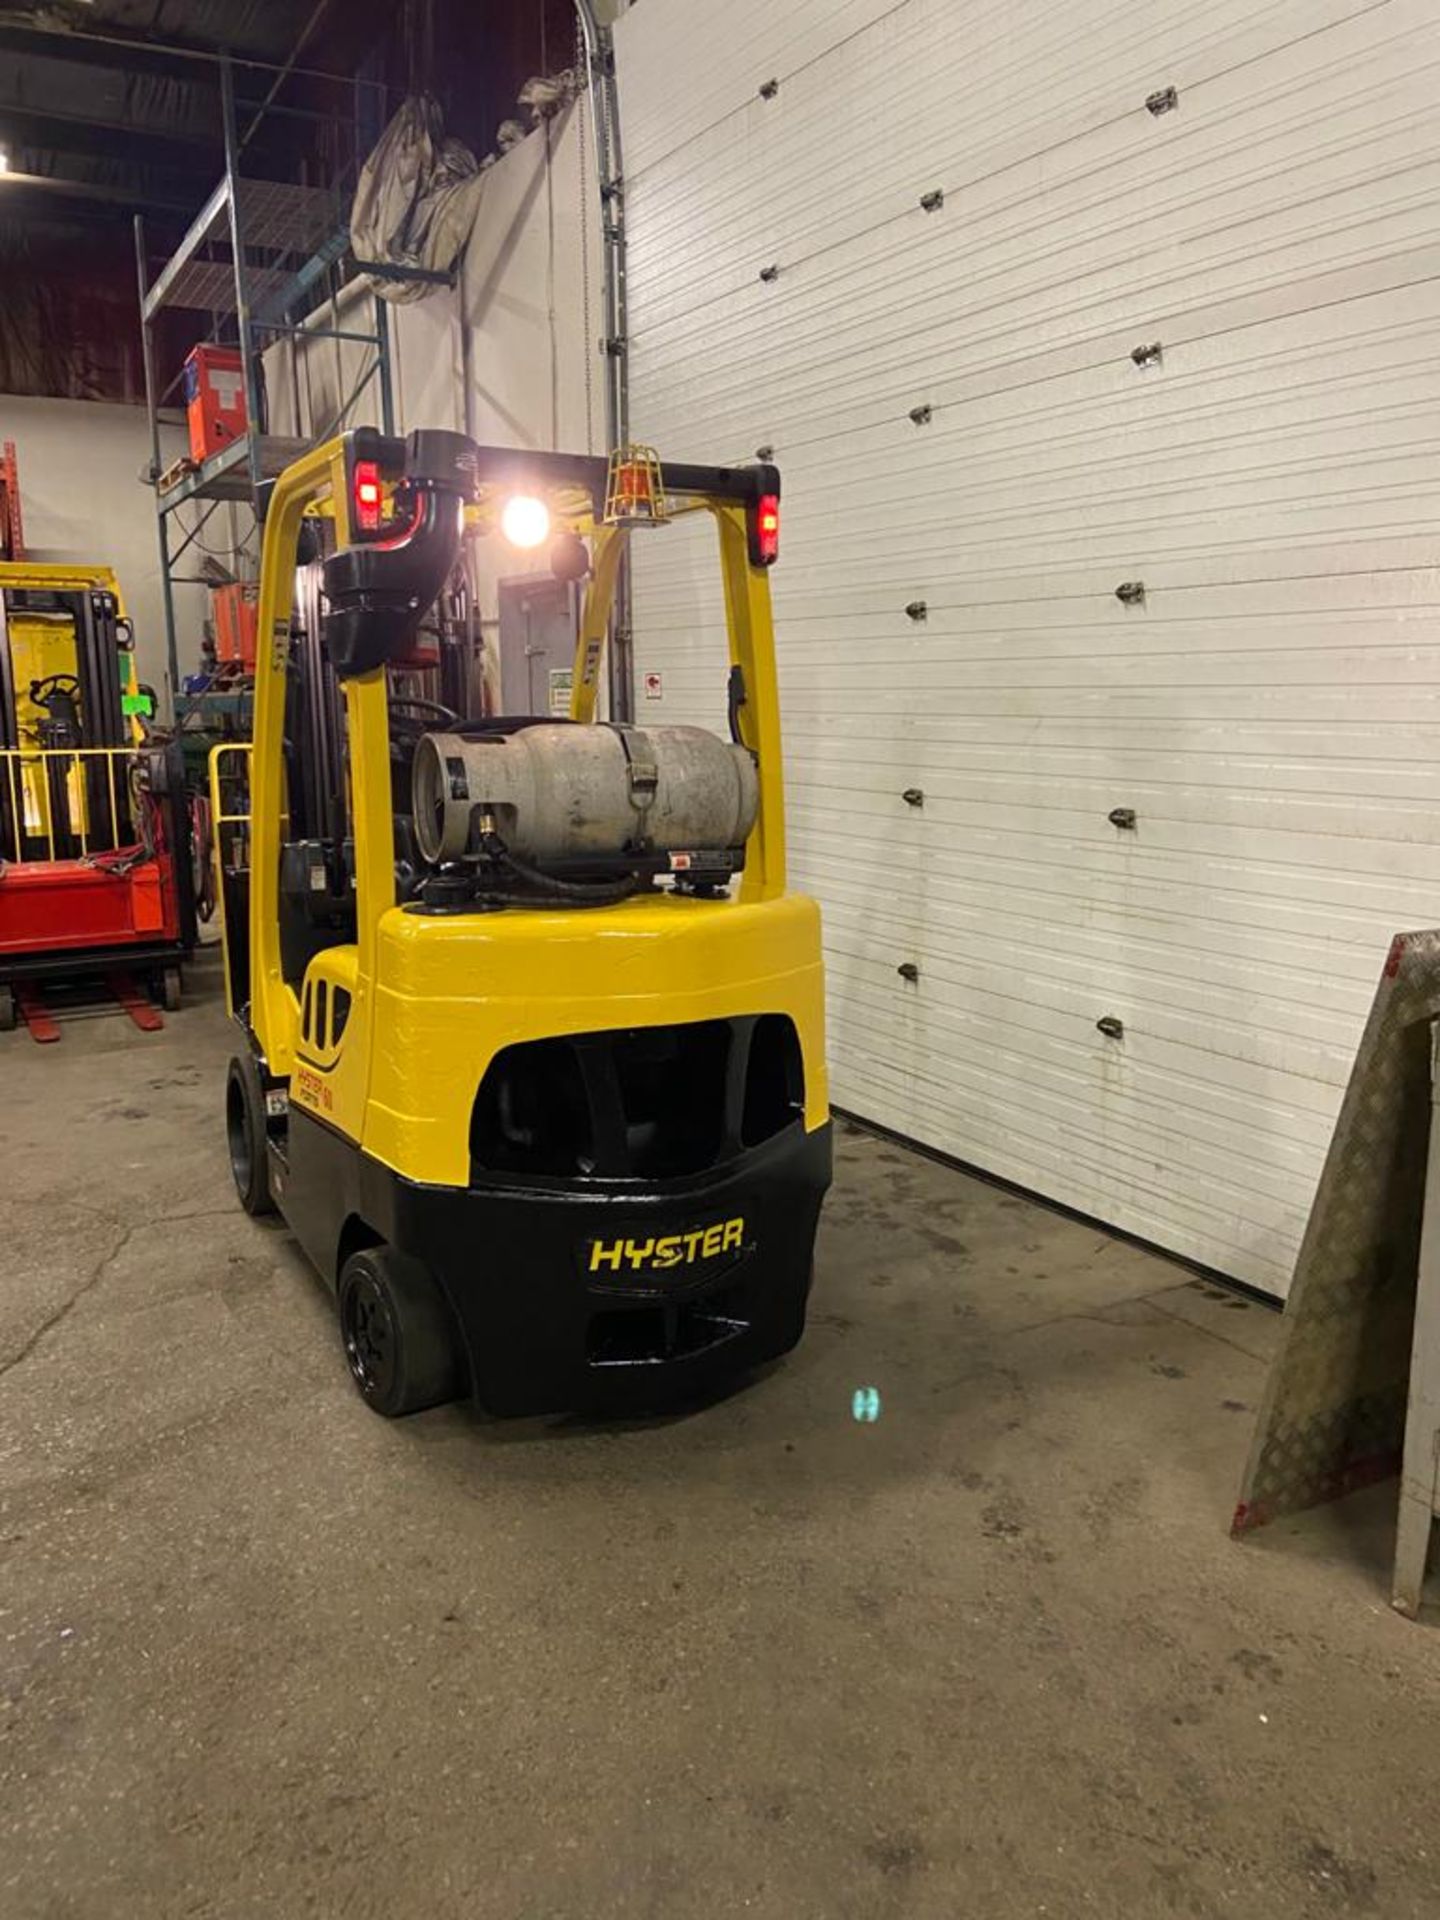 FREE CUSTOMS - 2016 Hyster 6000lbs Capacity Forklift LPG (propane) with 3-STAGE MAST with - Image 3 of 3